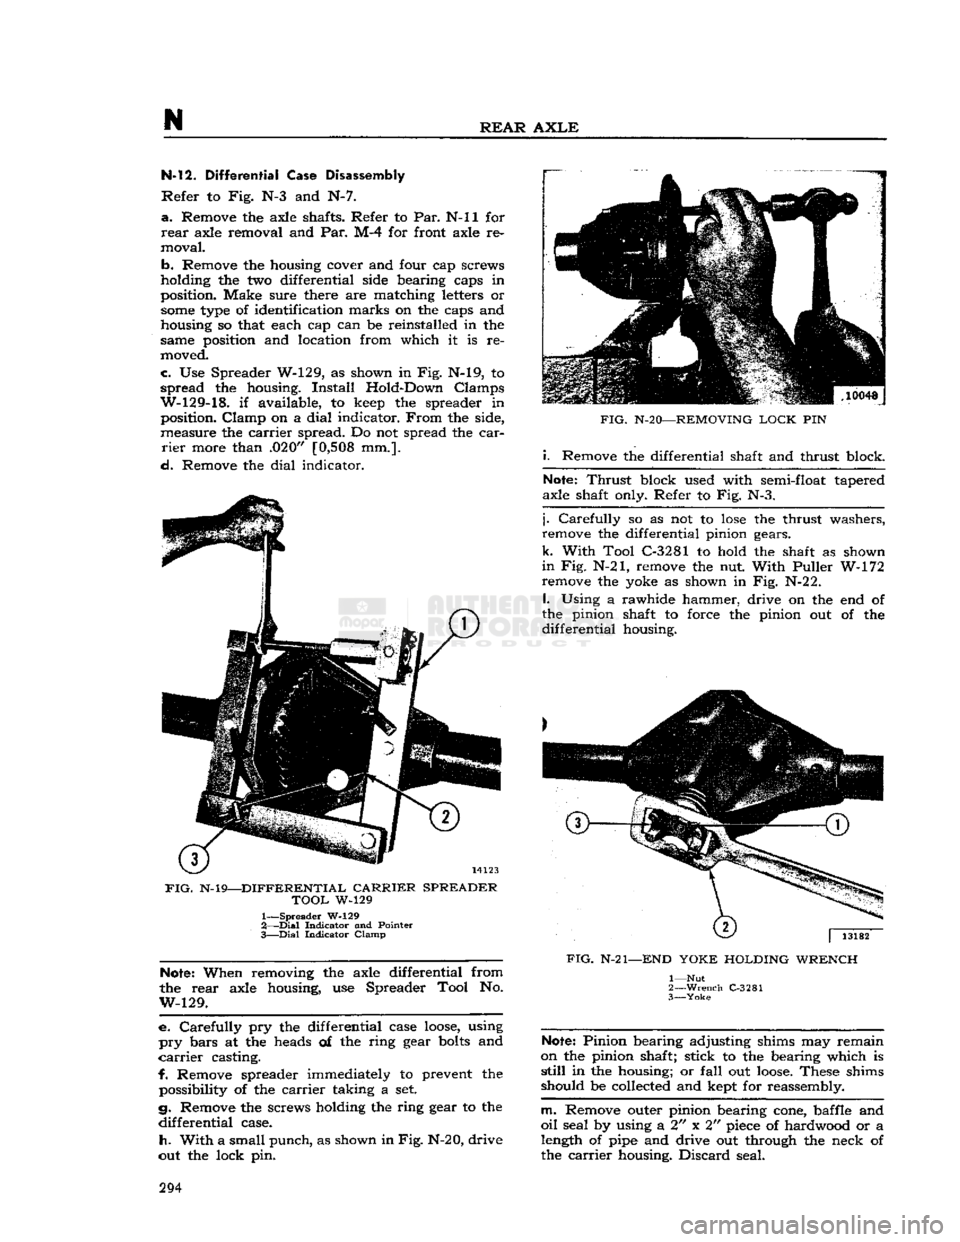 JEEP CJ 1953 User Guide 
N 

REAR AXLE 
N-l2.
 Differential Case
 Disassembly 

Refer
 to
 Fig.
 N-3 and N-7. 

a.
 Remove
 the
 axle shafts. Refer
 to
 Par.
 N-ll for 

rear
 axle removal
 and
 Par.
 M-4 for
 front axle
 re